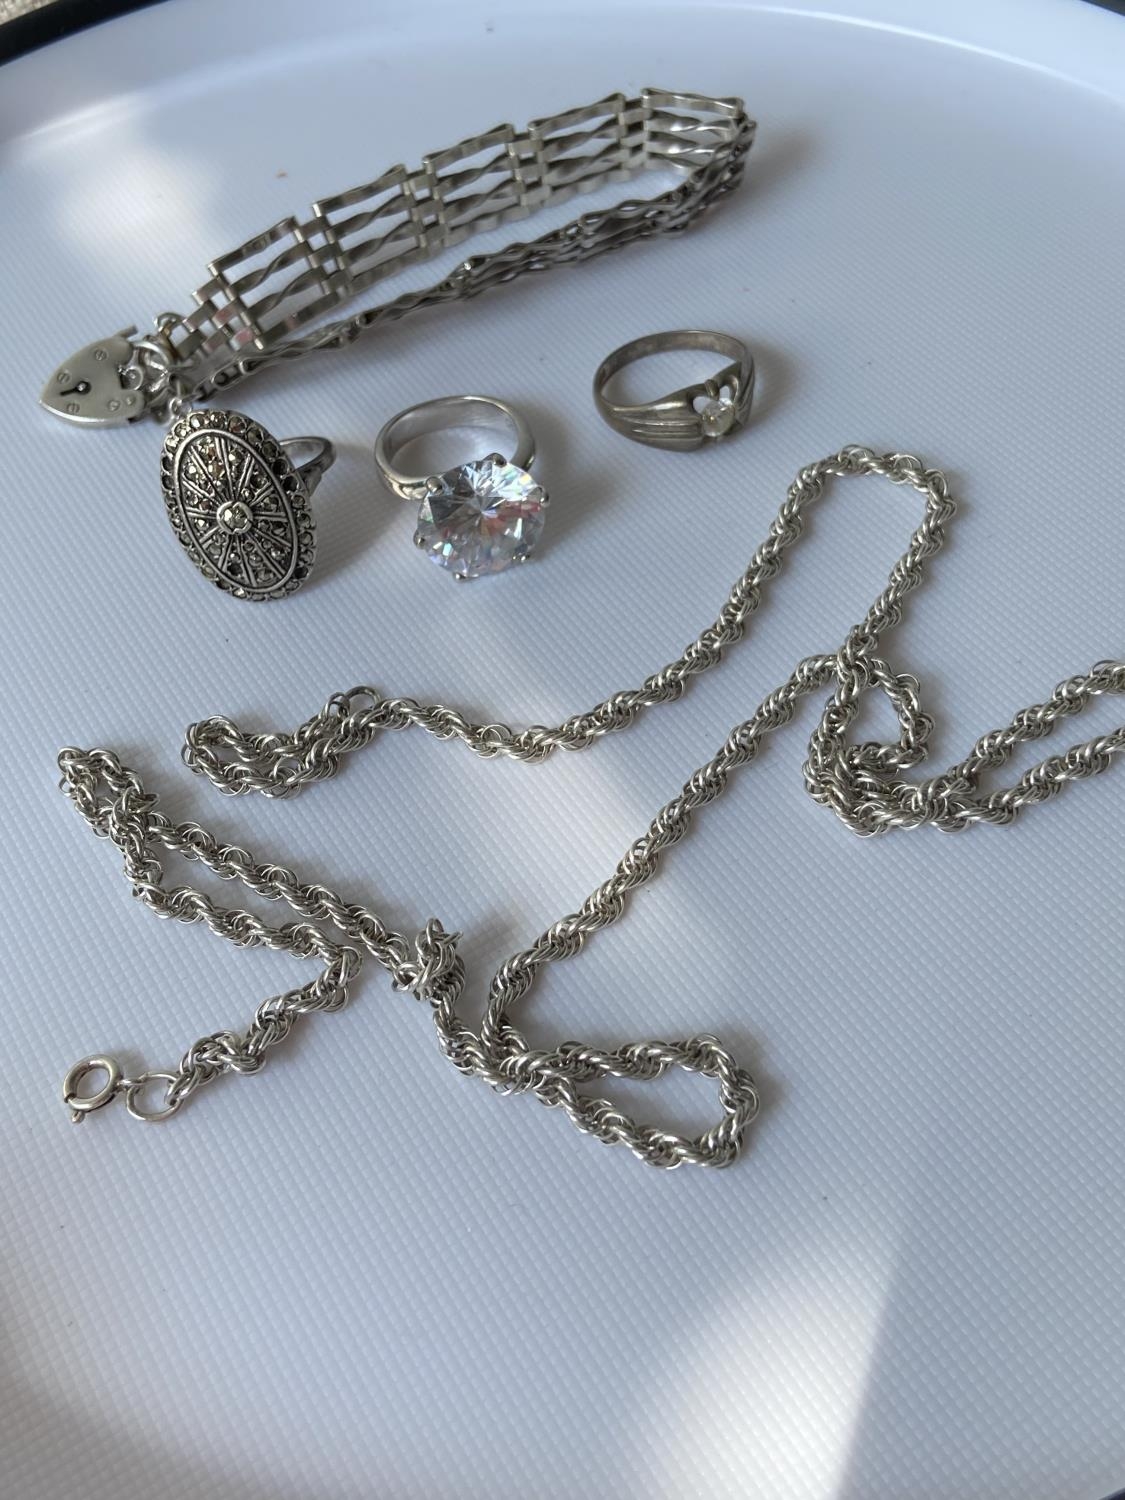 3 various silver rings, a silver gate bracelet and a silver rope necklace - Image 6 of 6